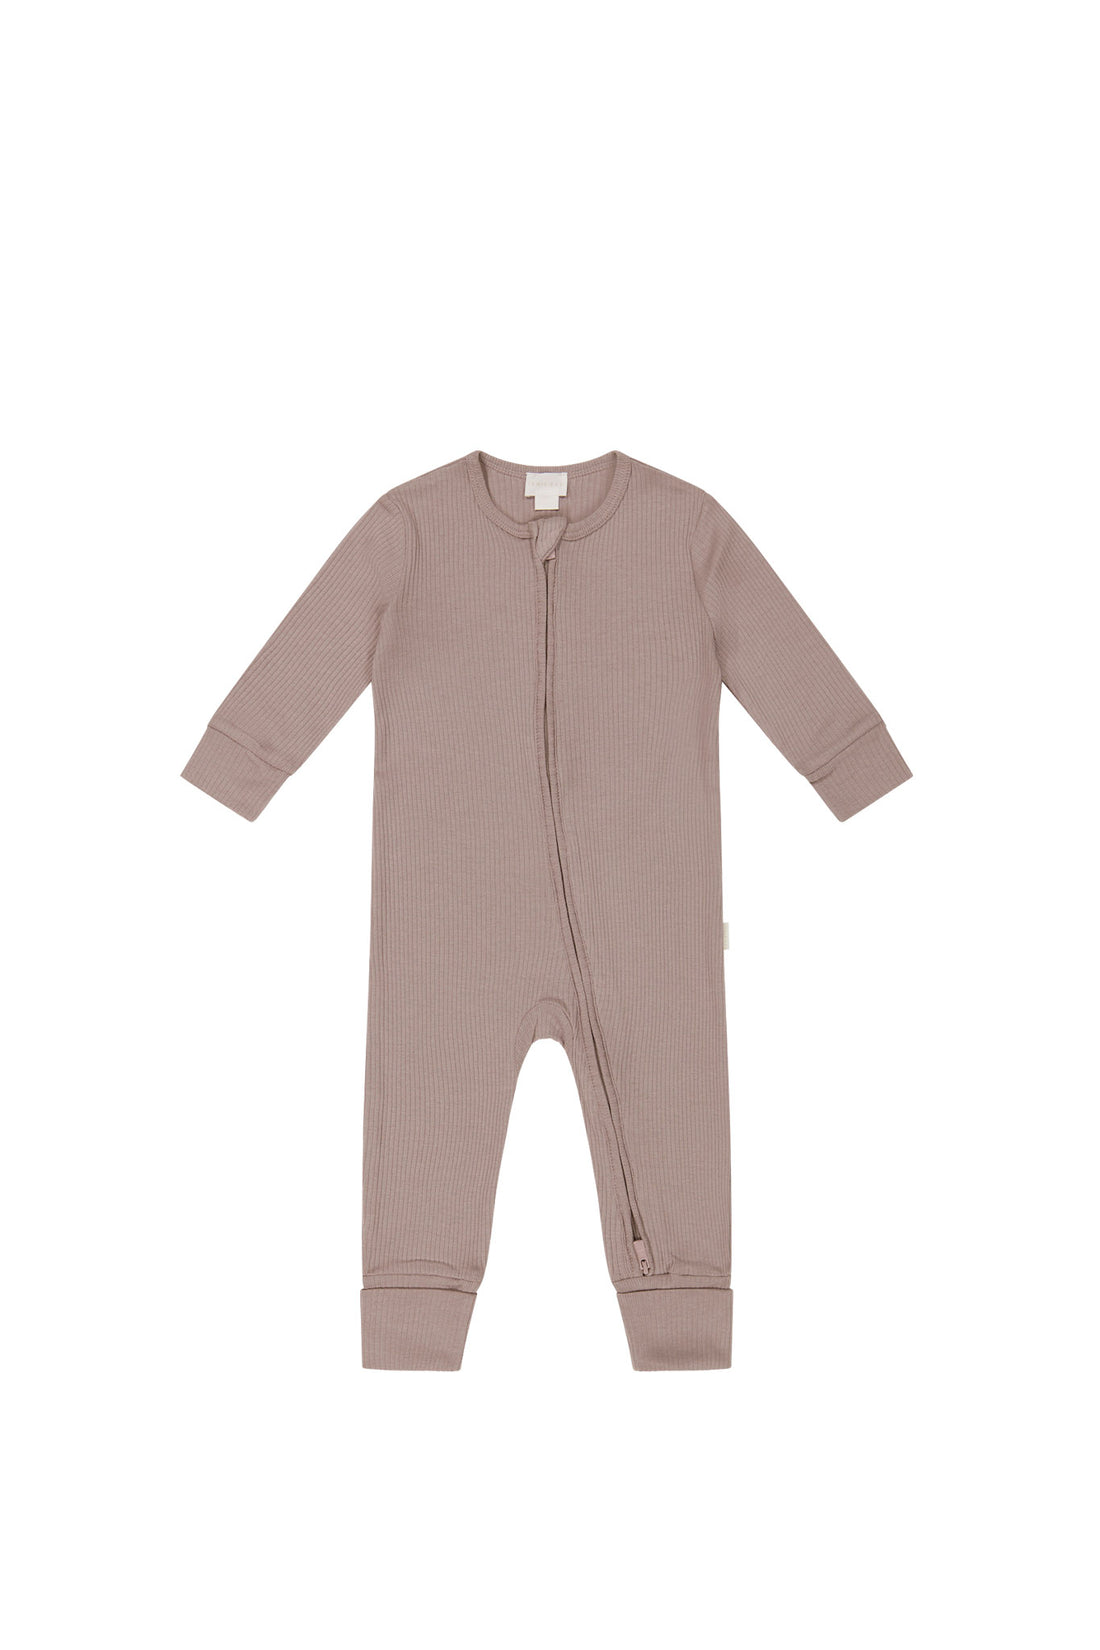 Organic Cotton Modal Gracelyn Zip Onepiece - Softest Mauve Childrens Onepiece from Jamie Kay NZ